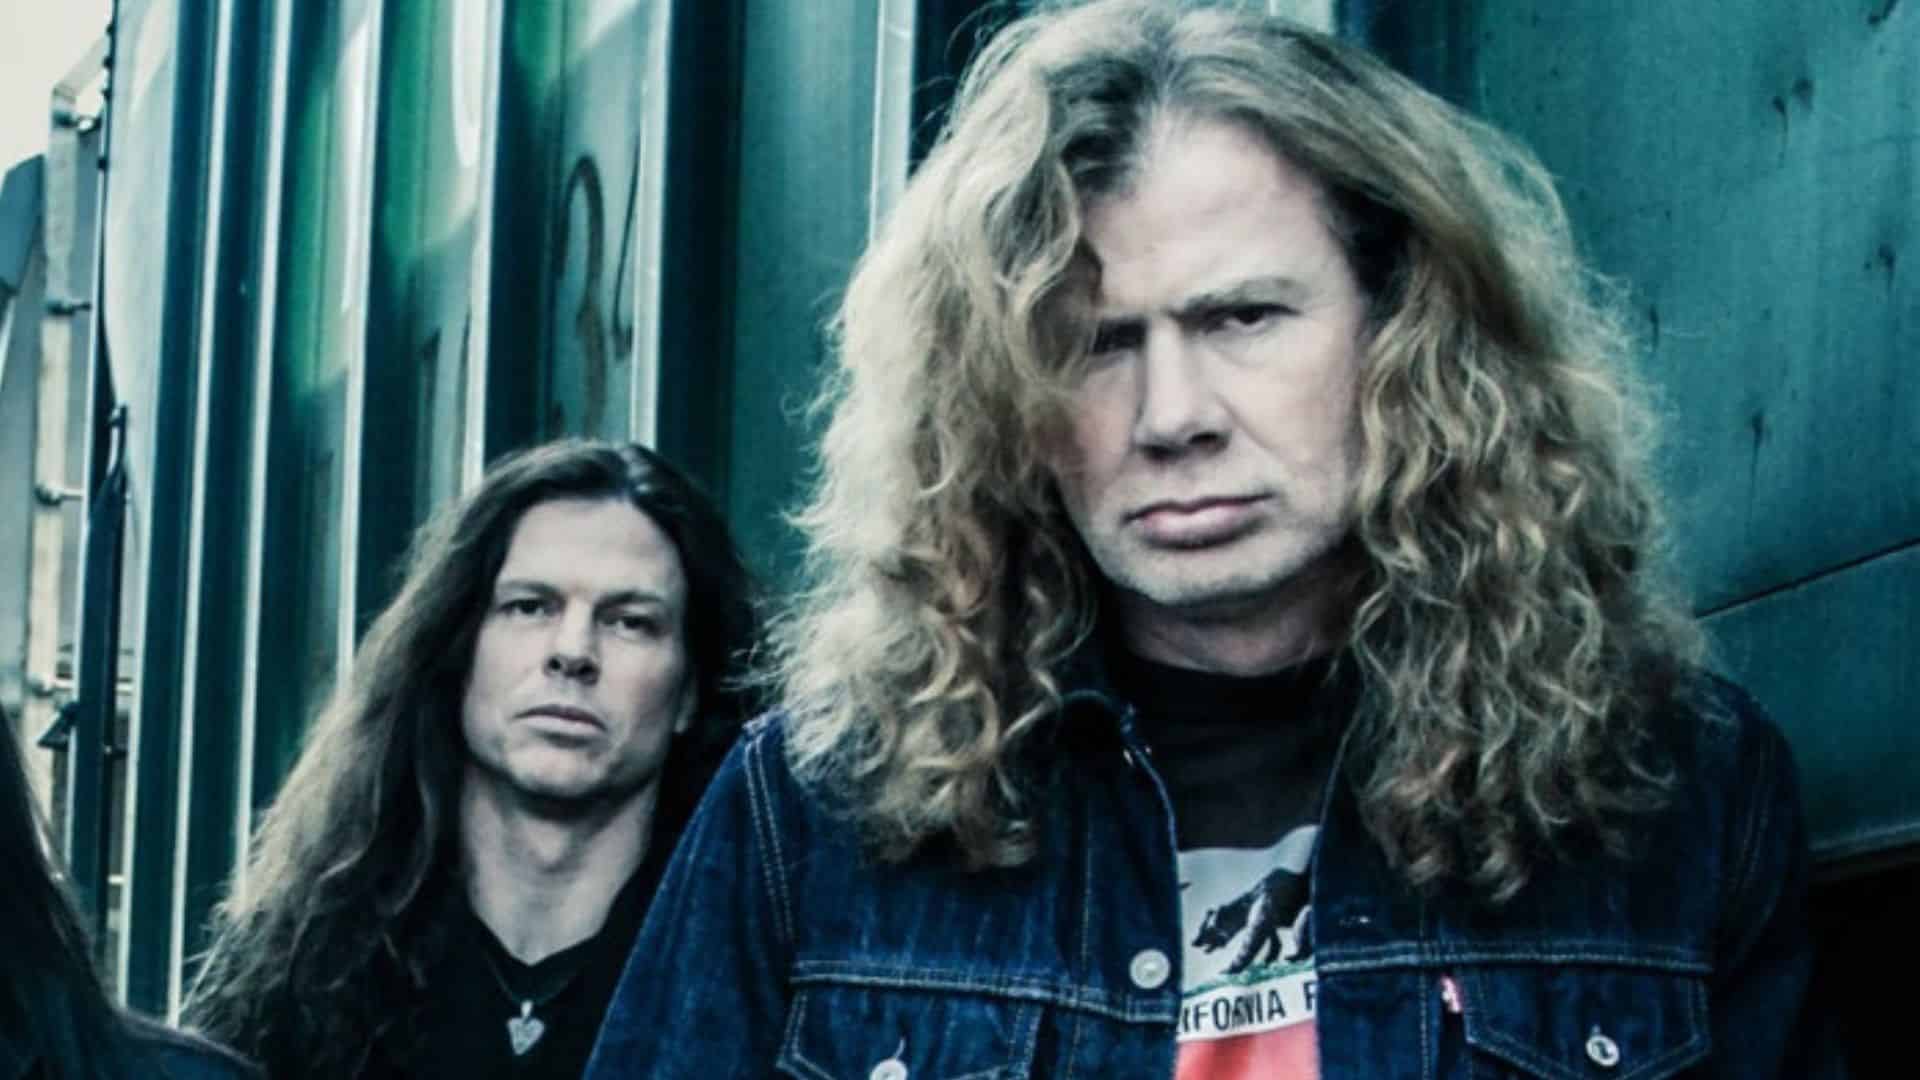 Chris Broderick Dave Mustaine